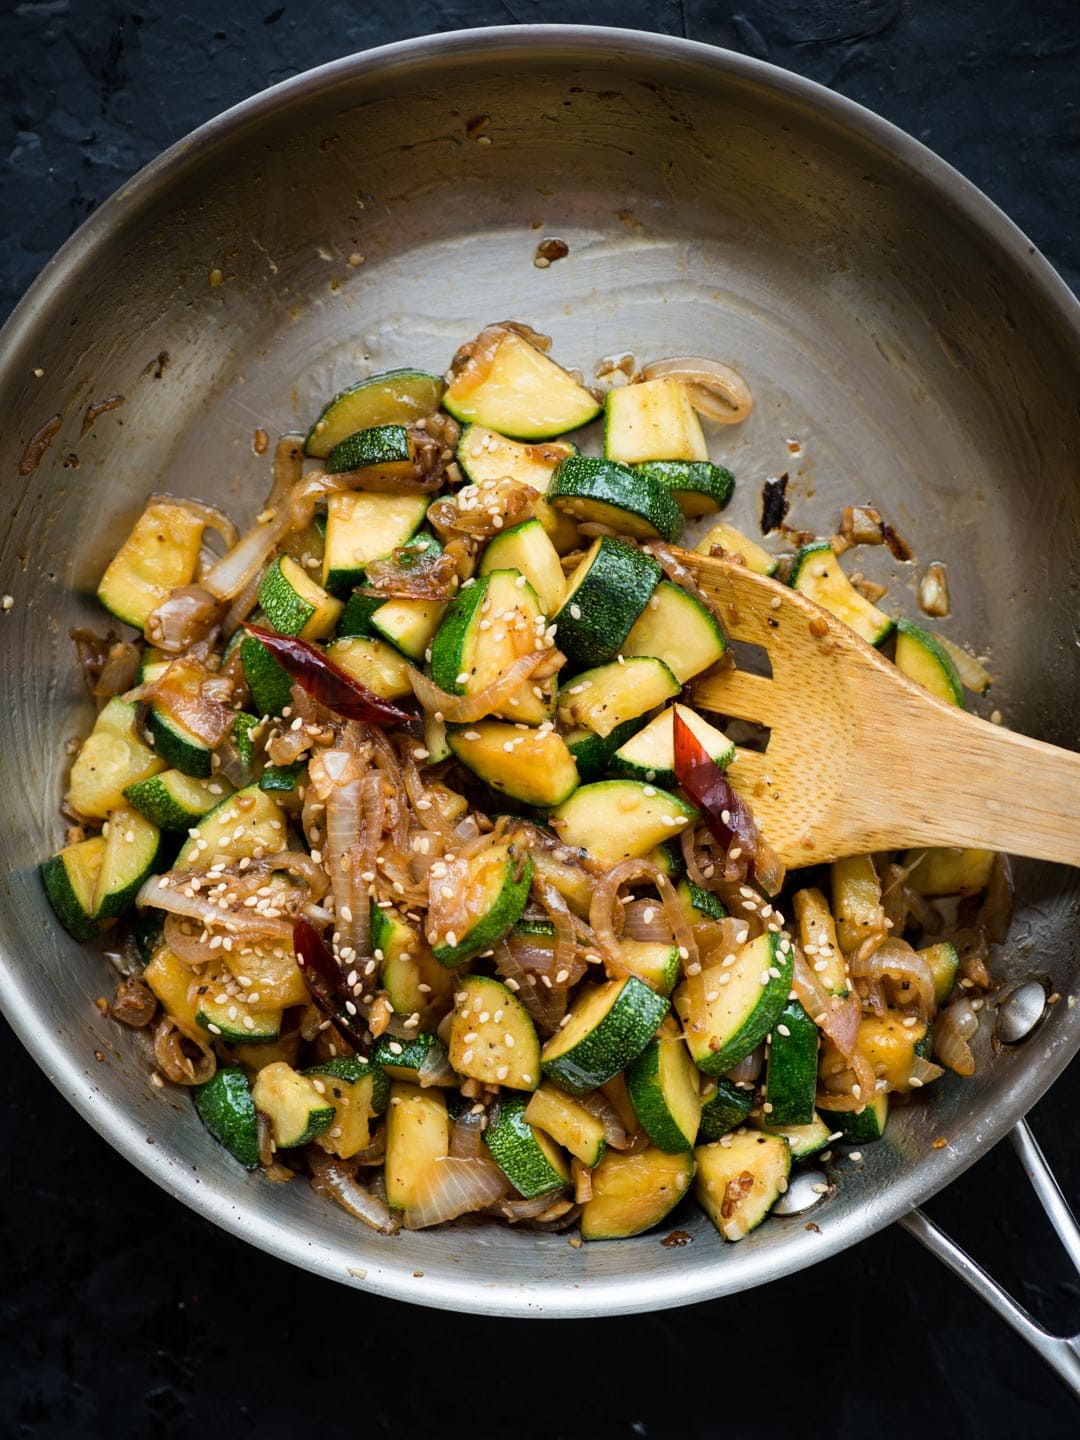 This flavour-packed Zucchini Stir Fry gets ready in 15 mins. Make this super quick stir fry with Onion, Garlic, Zucchini tossed in a simple sauce.